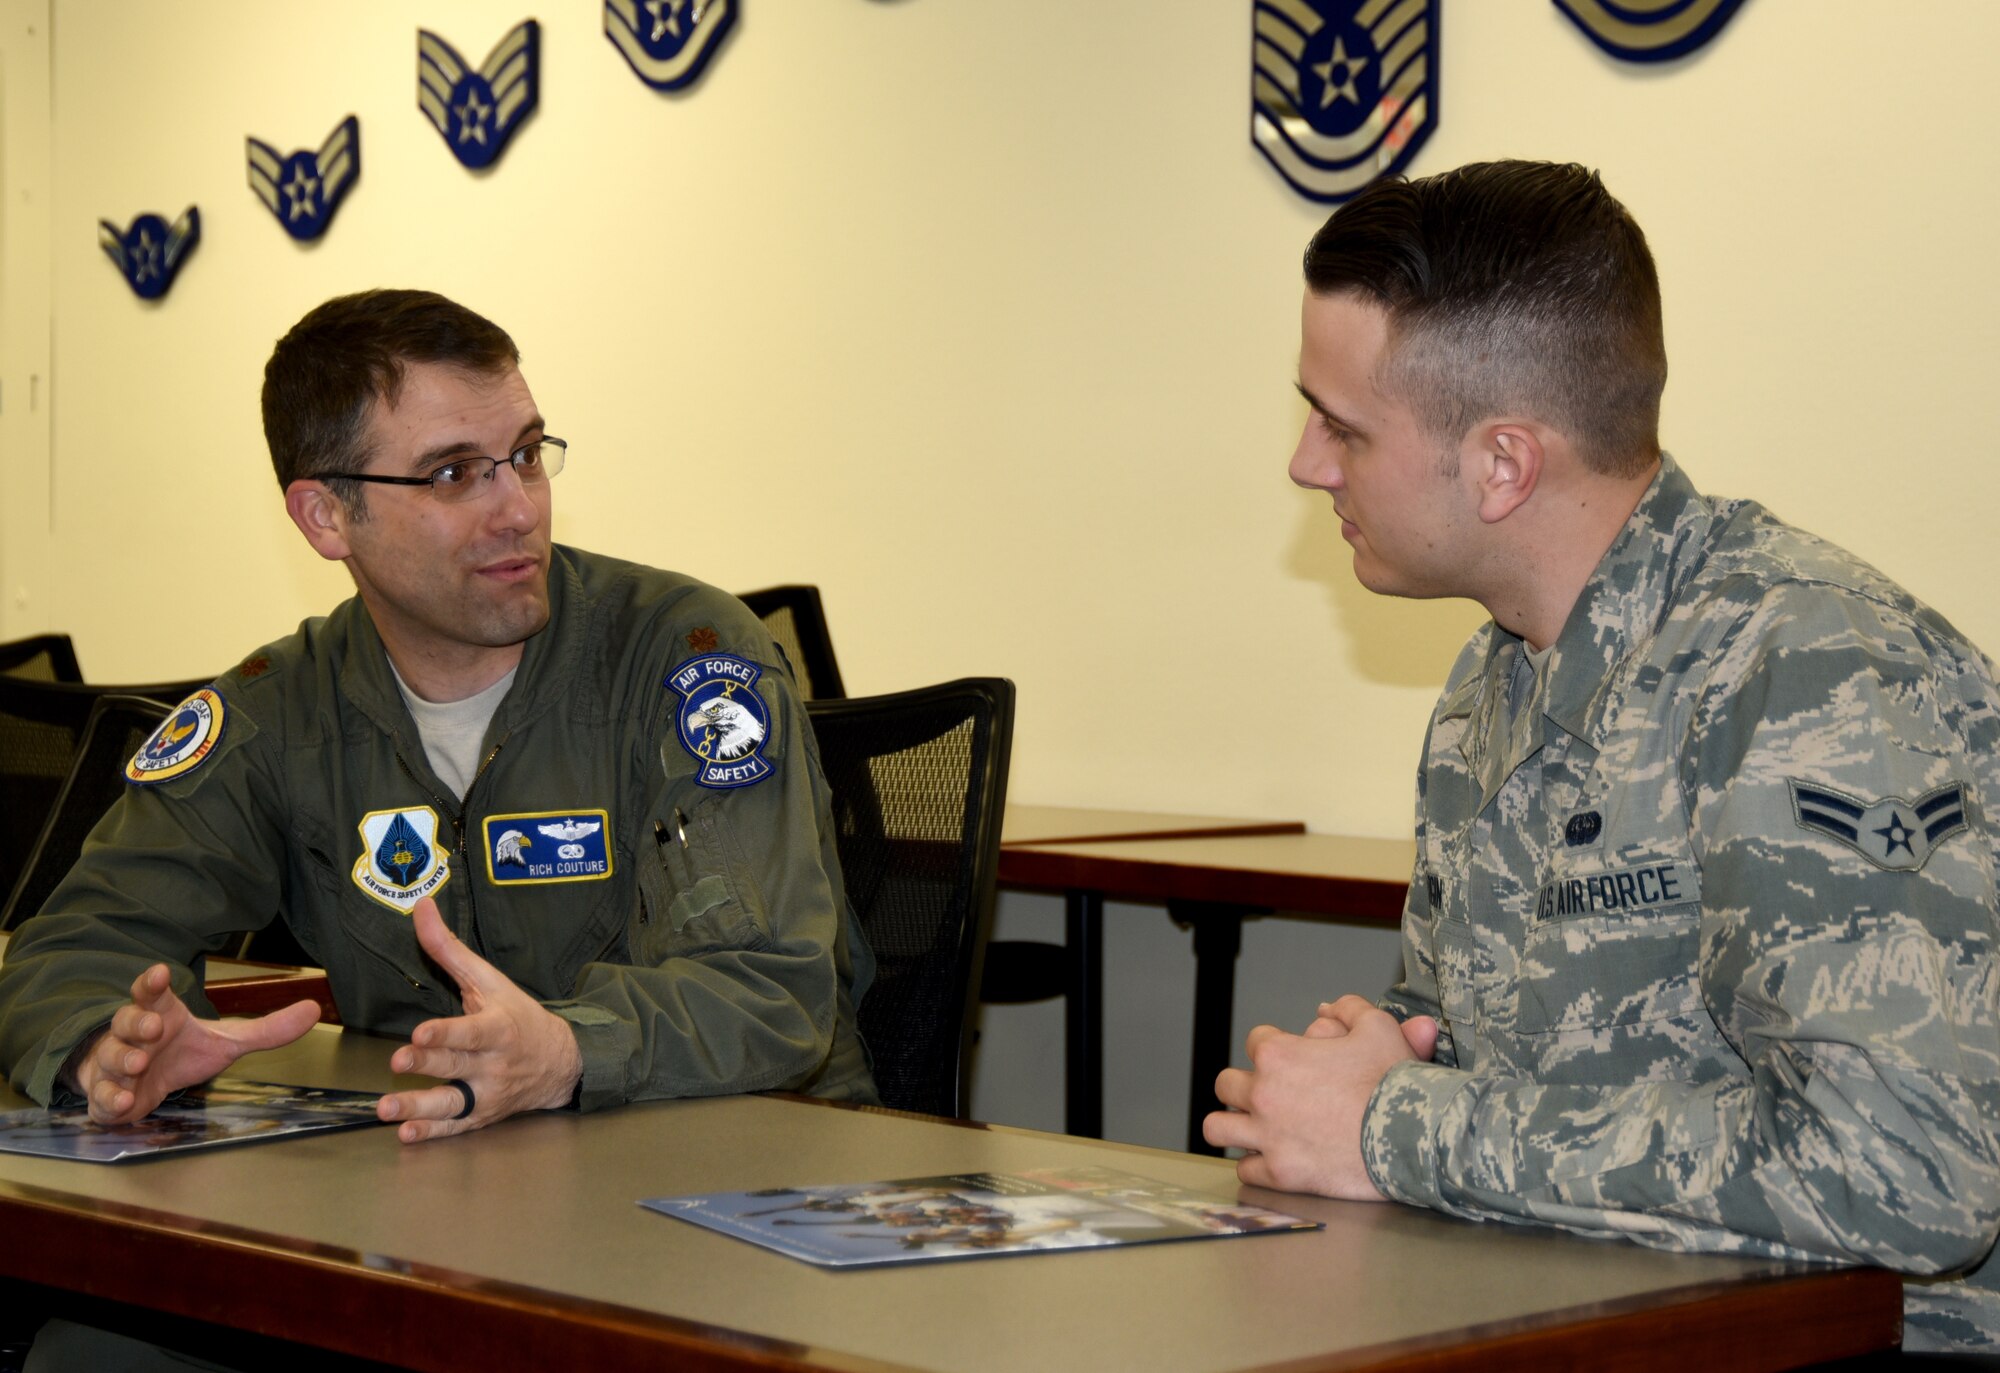 Maj. Rich Couture, an executive officer with the Air Force Safety Center, discusses the Air Force Academy with Airman 1st Class Gregory Ogin of the 58th Special Operations Wing.  Couture  serves as the AFA deputy admissions liaison officer for all of New Mexico and El Paso.